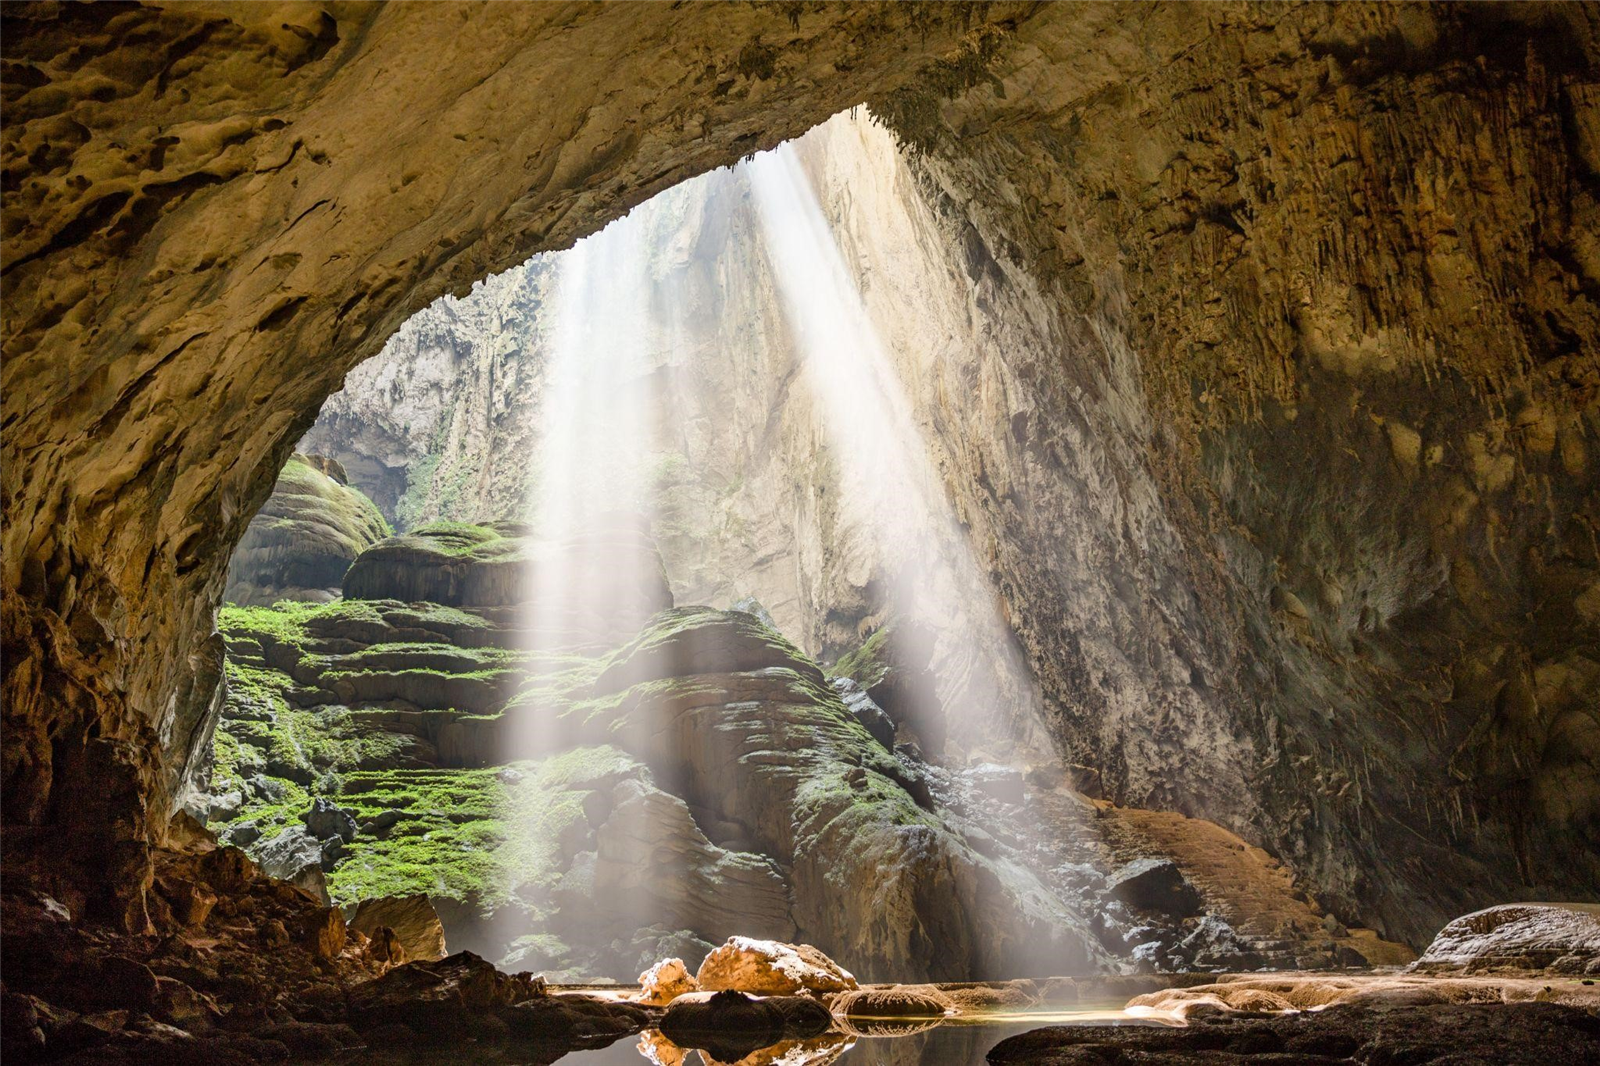 SON DOONG CAVE DISCOVERY